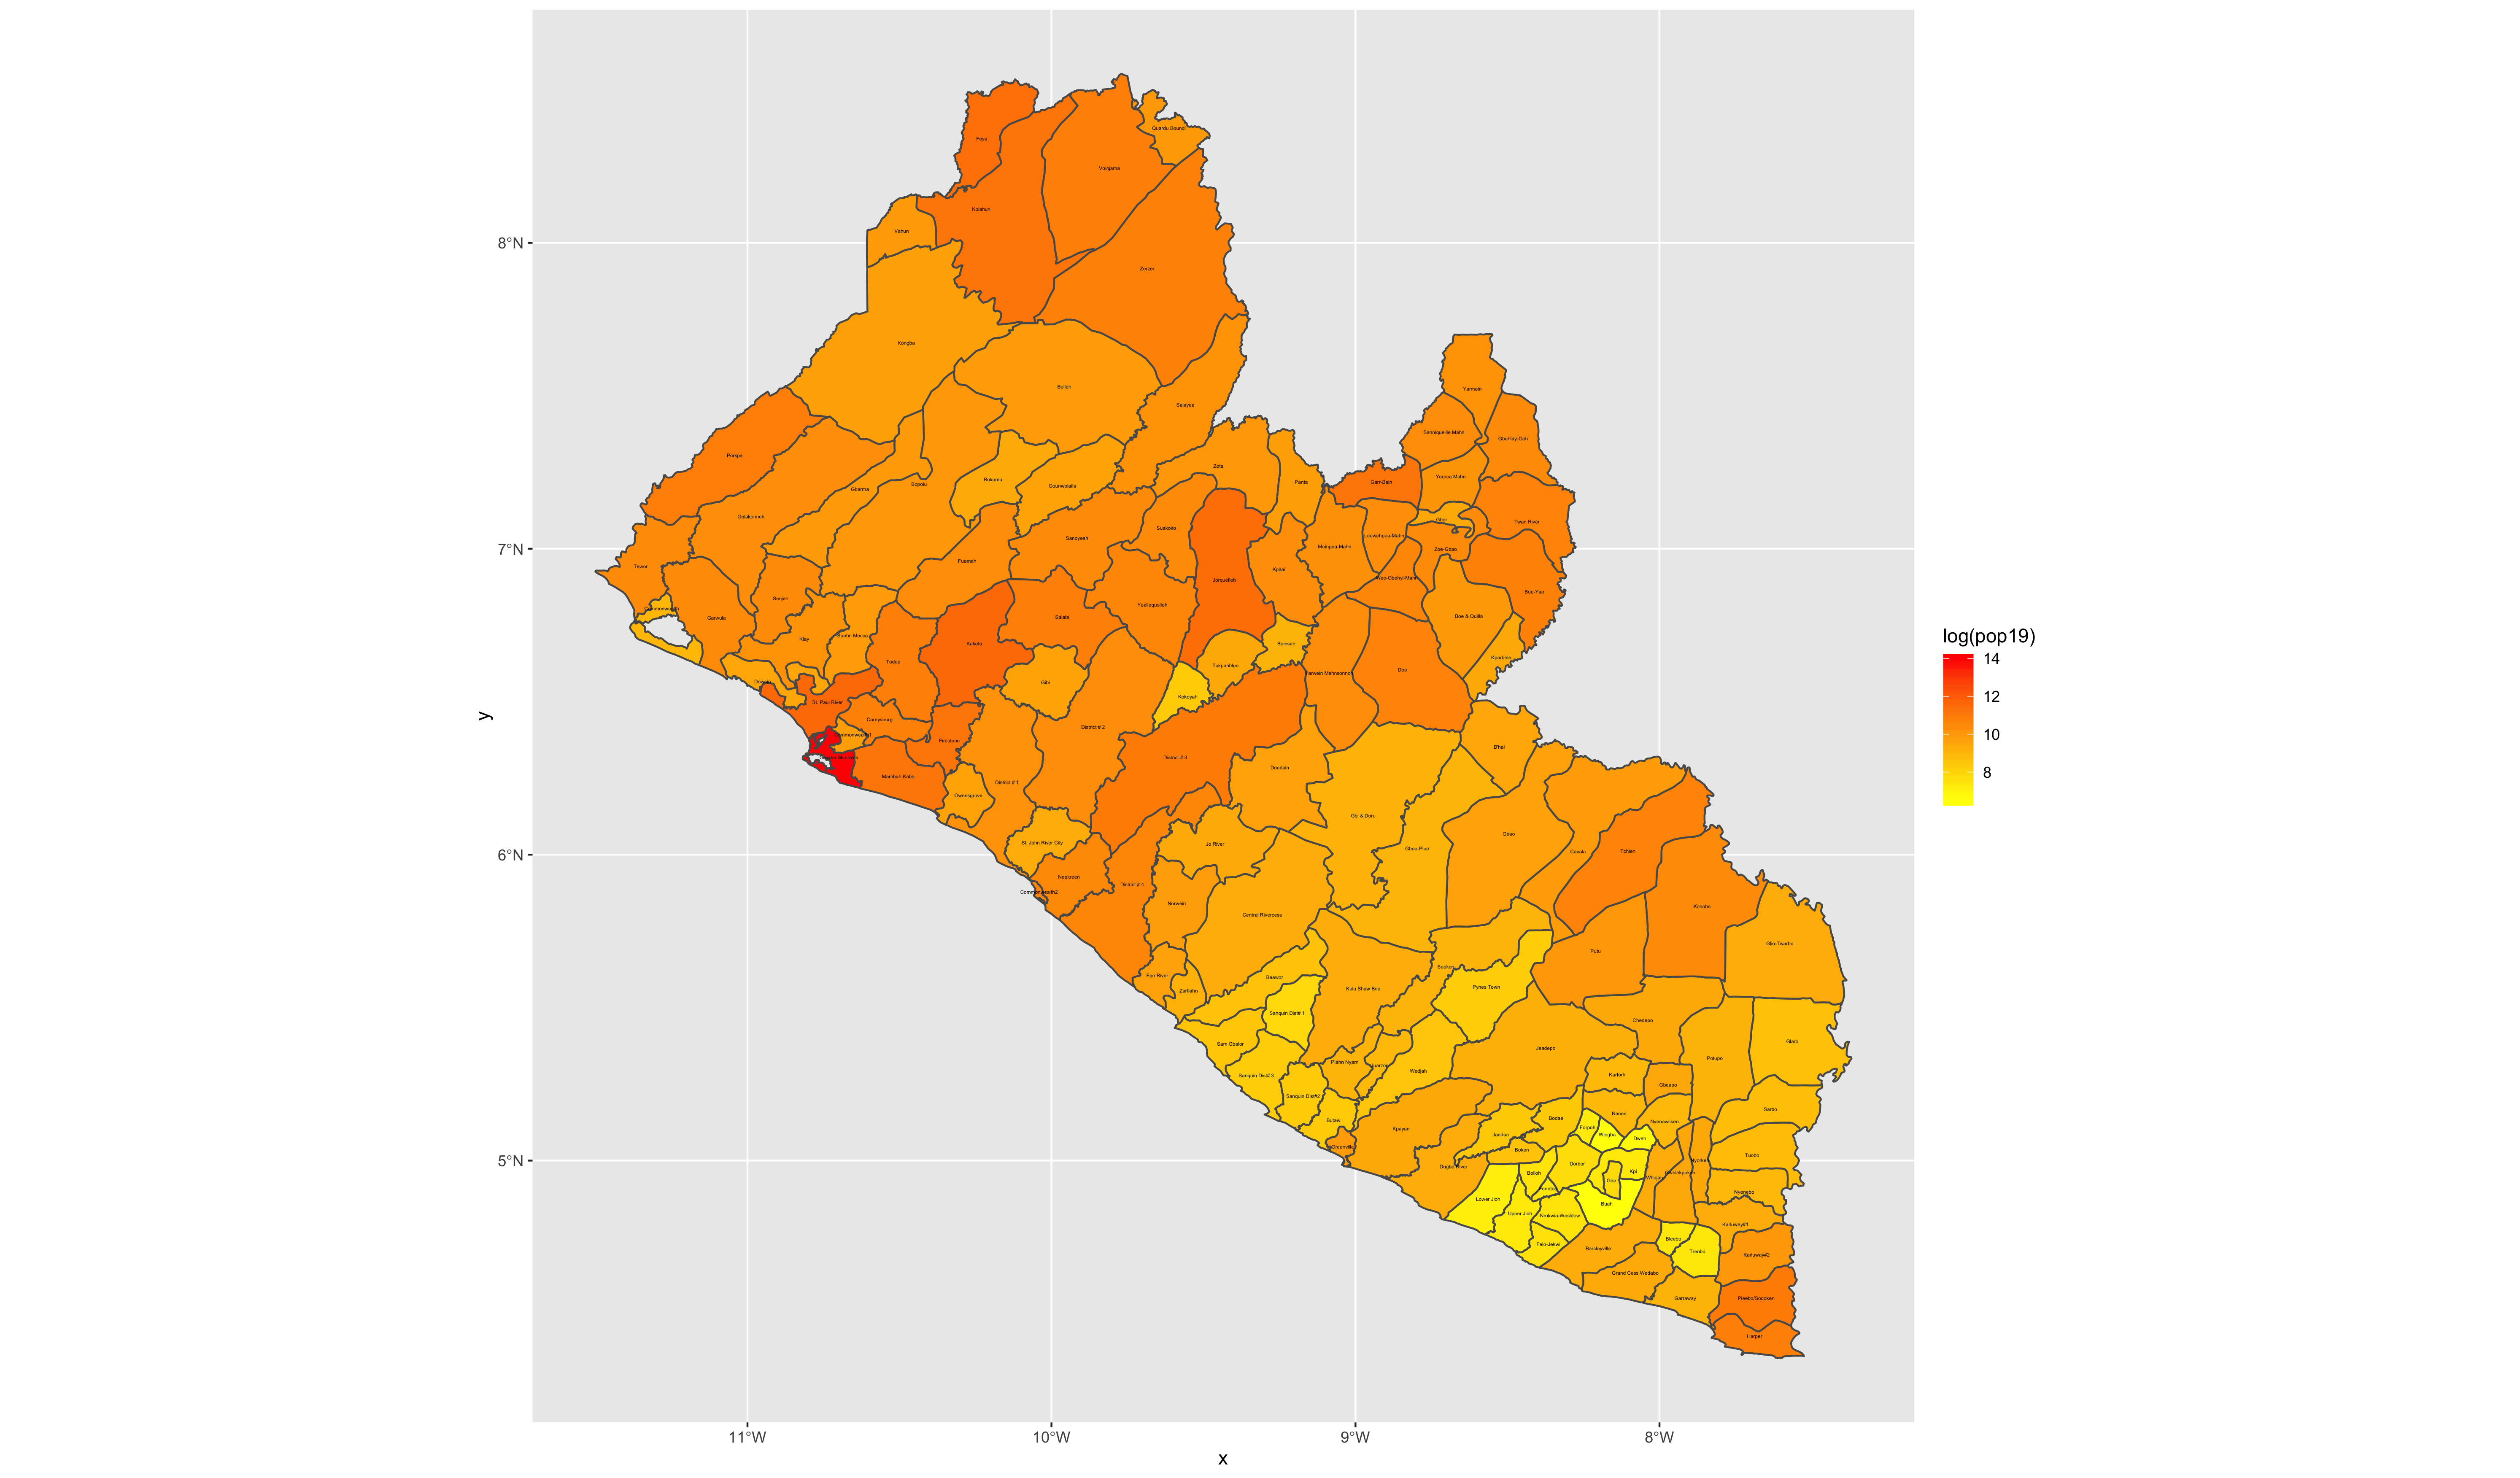 Liberia's District's described in terms of Log of Population